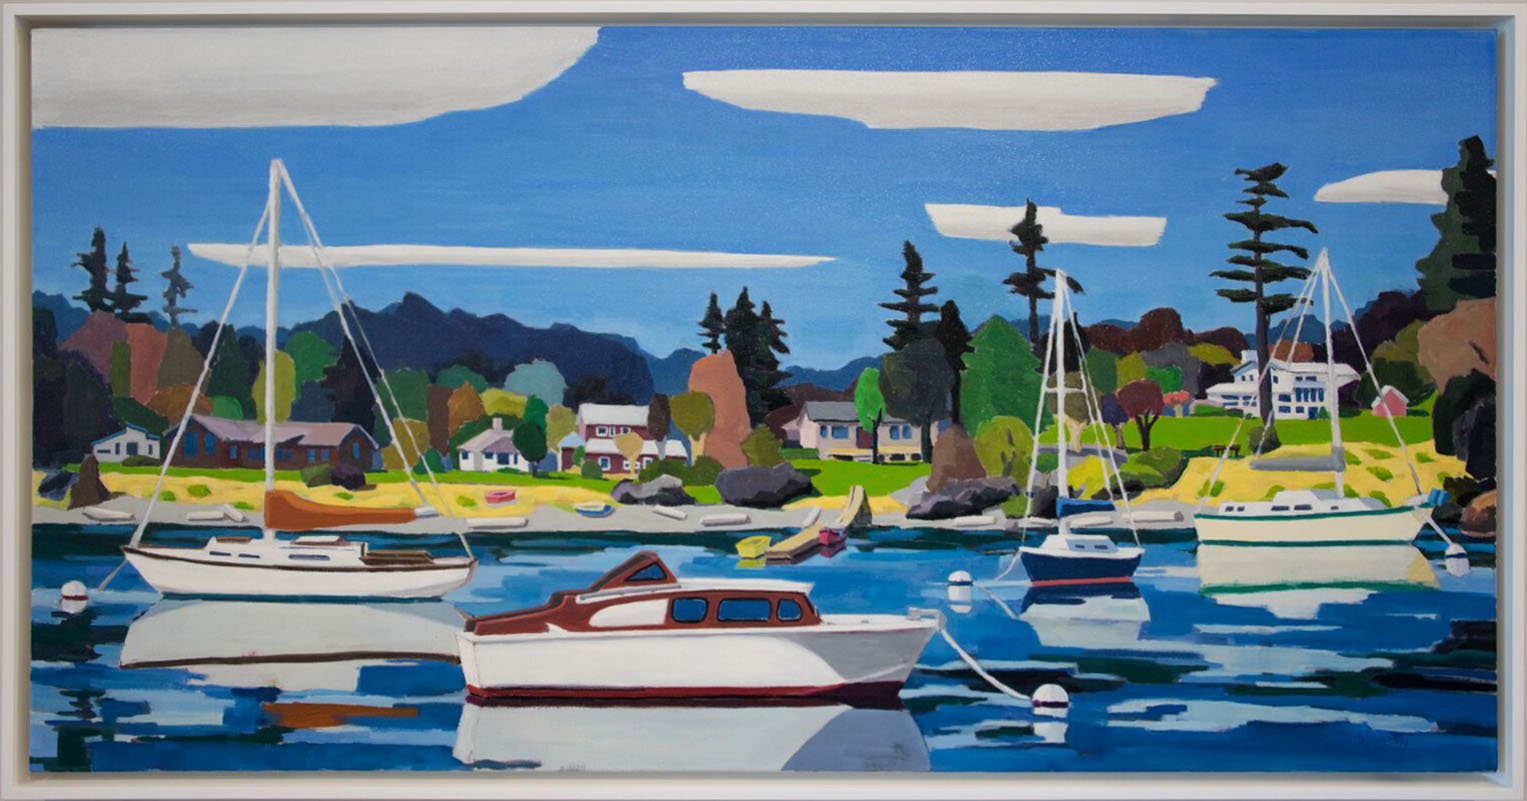 David Ridgway "Five Clouds Friday Harbor" 24 x 48 Oil on Canvas